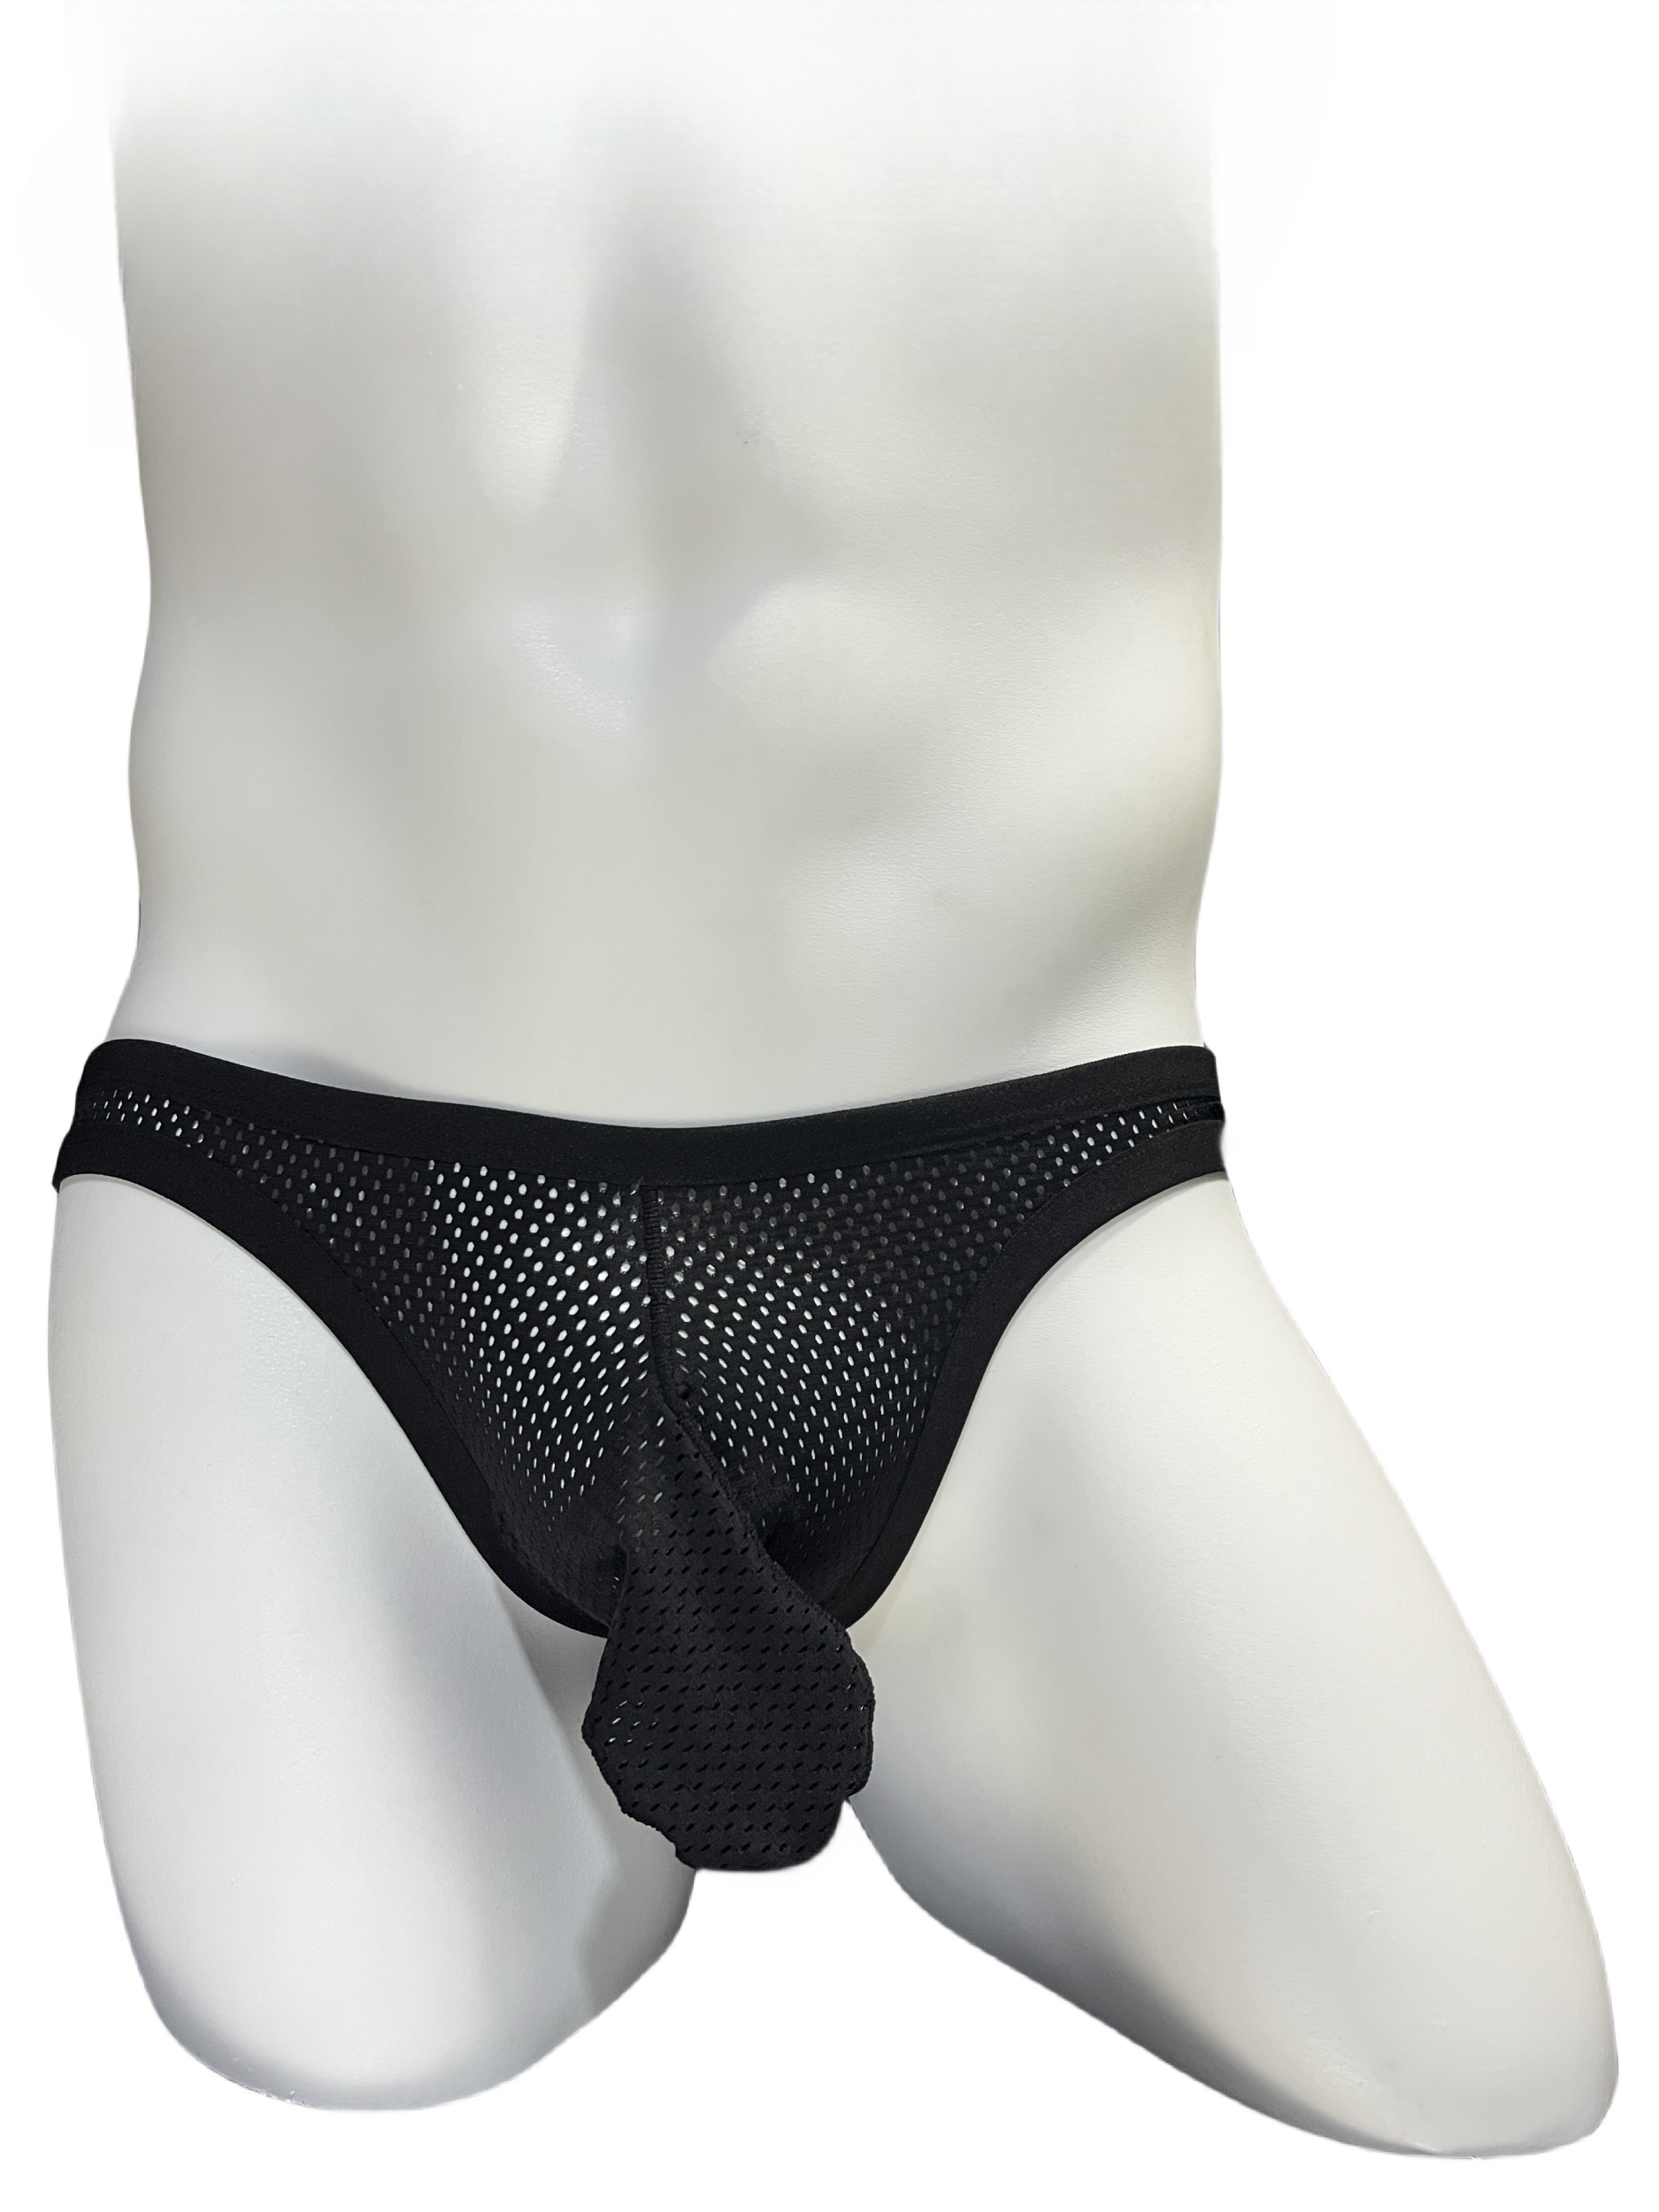 Mens Sheer Elephant Trunk Thong Thong Briefs Underwear Panties From  Acadiany, $7.23